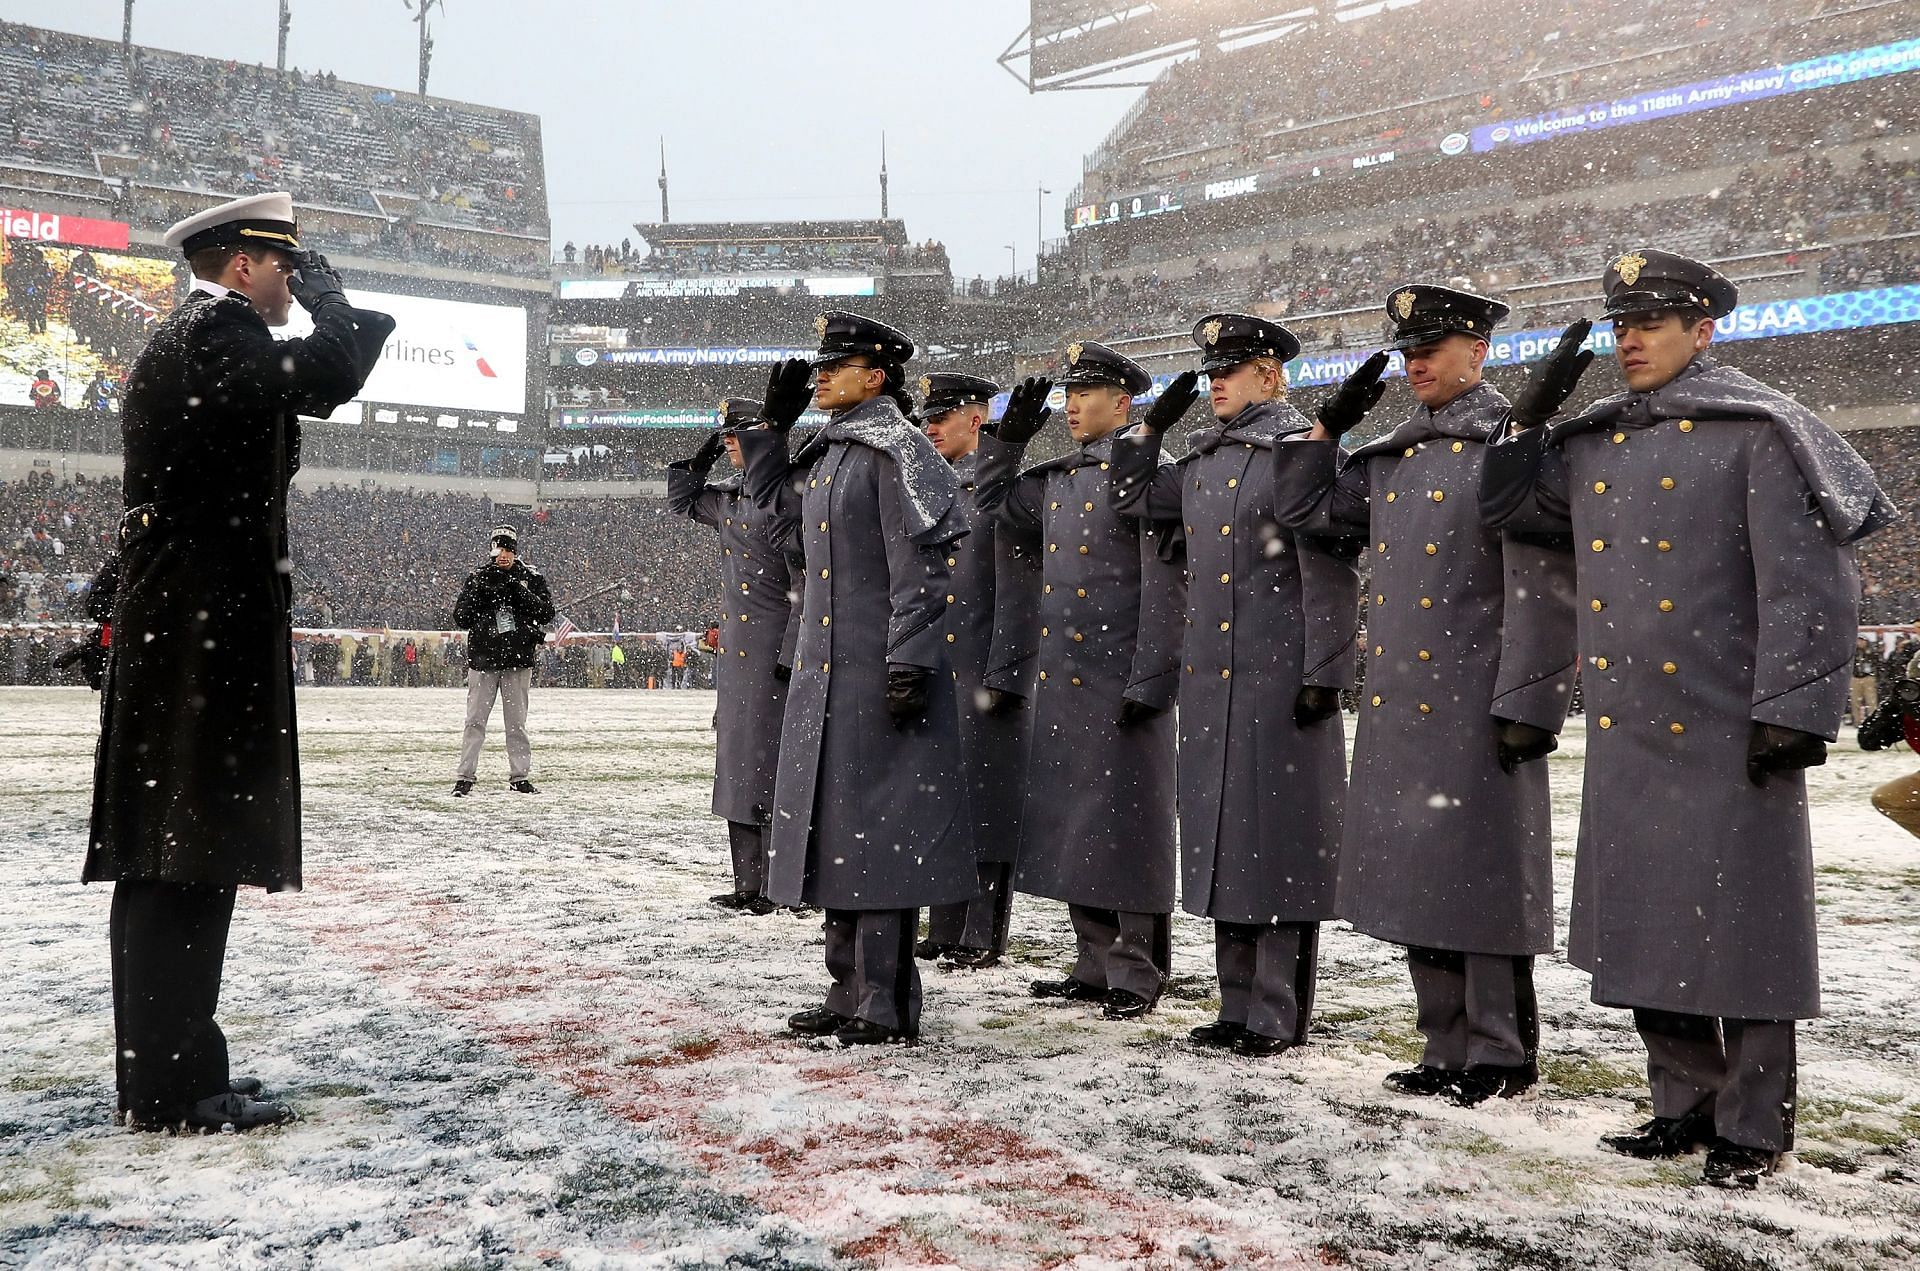 Army-Navy Cadets and Midshipmen perform the exchange prior to the 2017 game in Philadelphia (Photo: Getty)